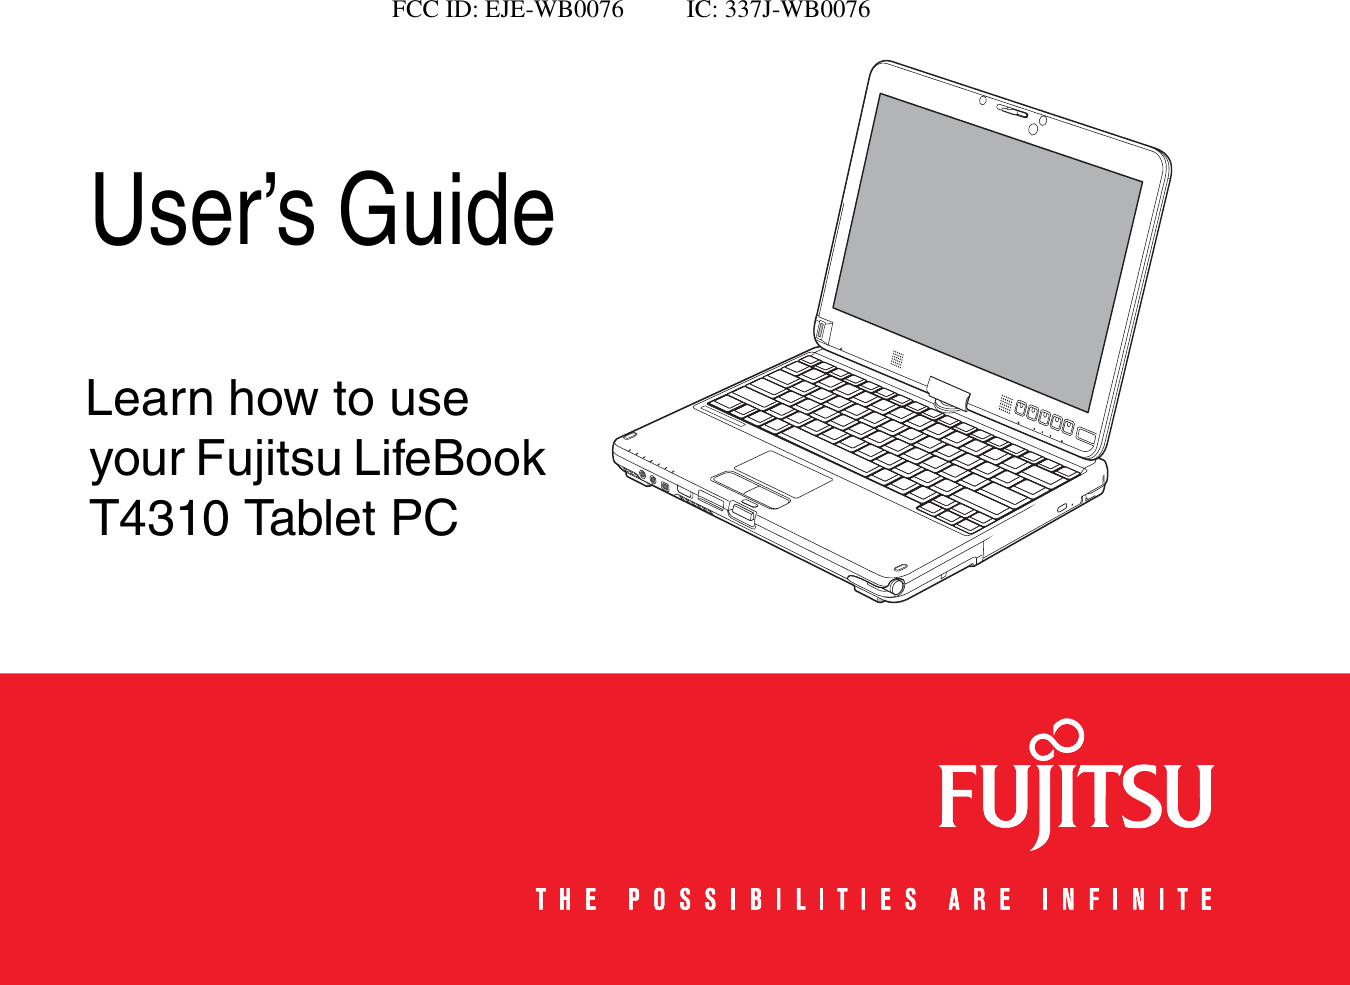                      FCC ID: EJE-WB0076          IC: 337J-WB0076 User’s GuideLearn how to use your Fujitsu LifeBook T410 Tablet PC